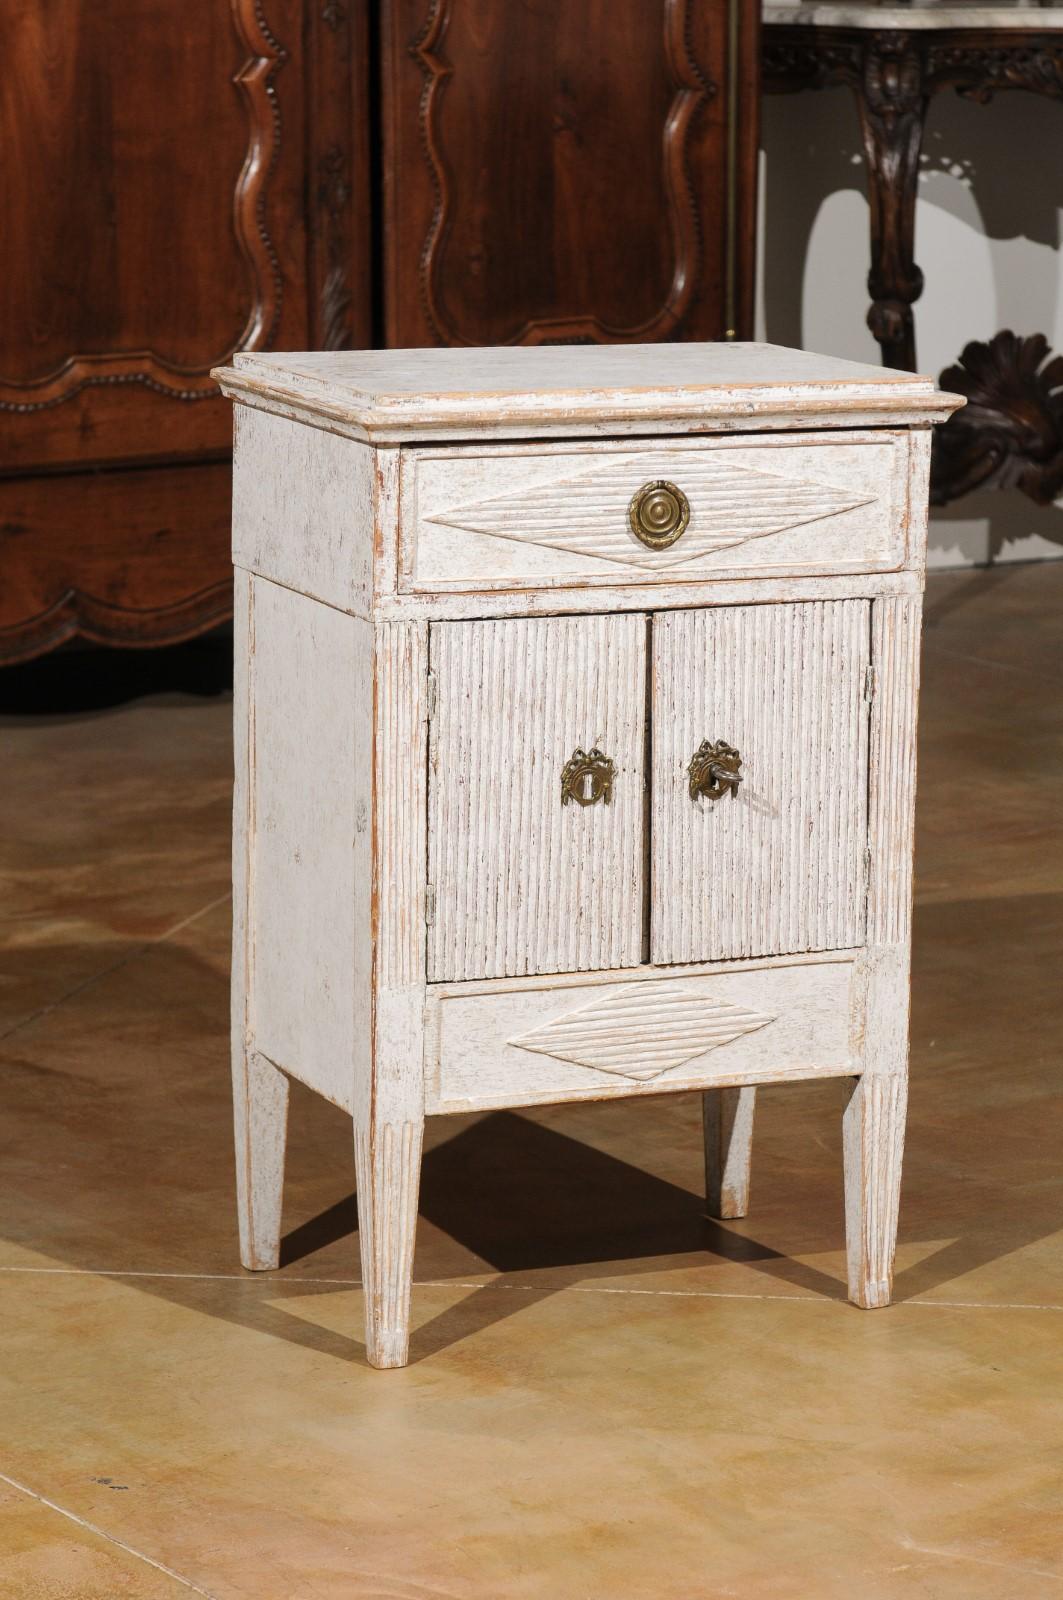 A Swedish Gustavian style painted wood nightstand cabinet from the 19th century, with diamond motifs and reeded patterns. Born in Sweden during the 19th century, this charming bedside cabinet features a slight raised rectangular top, sitting above a